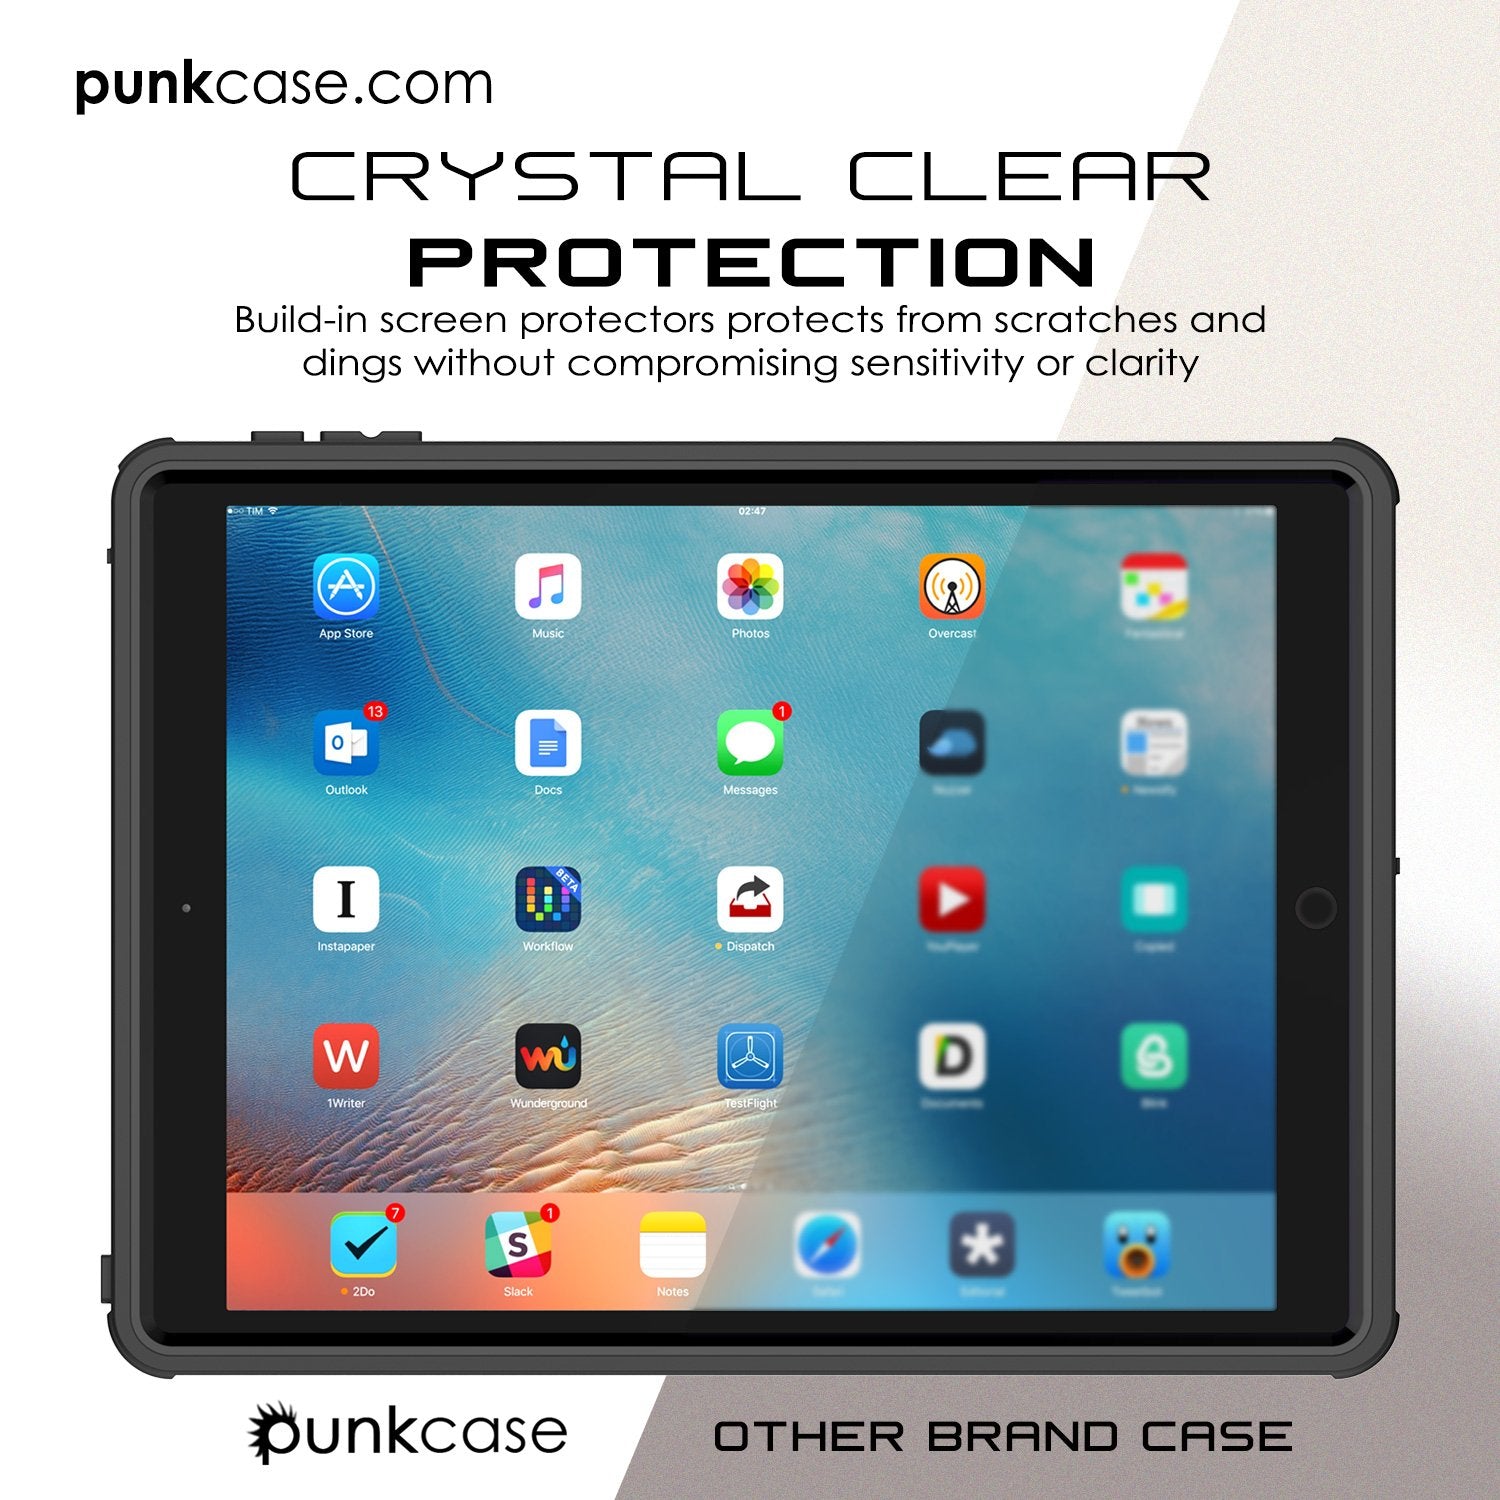 Punkcase iPad Pro 9.7 Case [CRYSTAL Series], Waterproof, Ultra-Thin Cover [Shockproof] [Dustproof] with Built-in Screen Protector [Black]